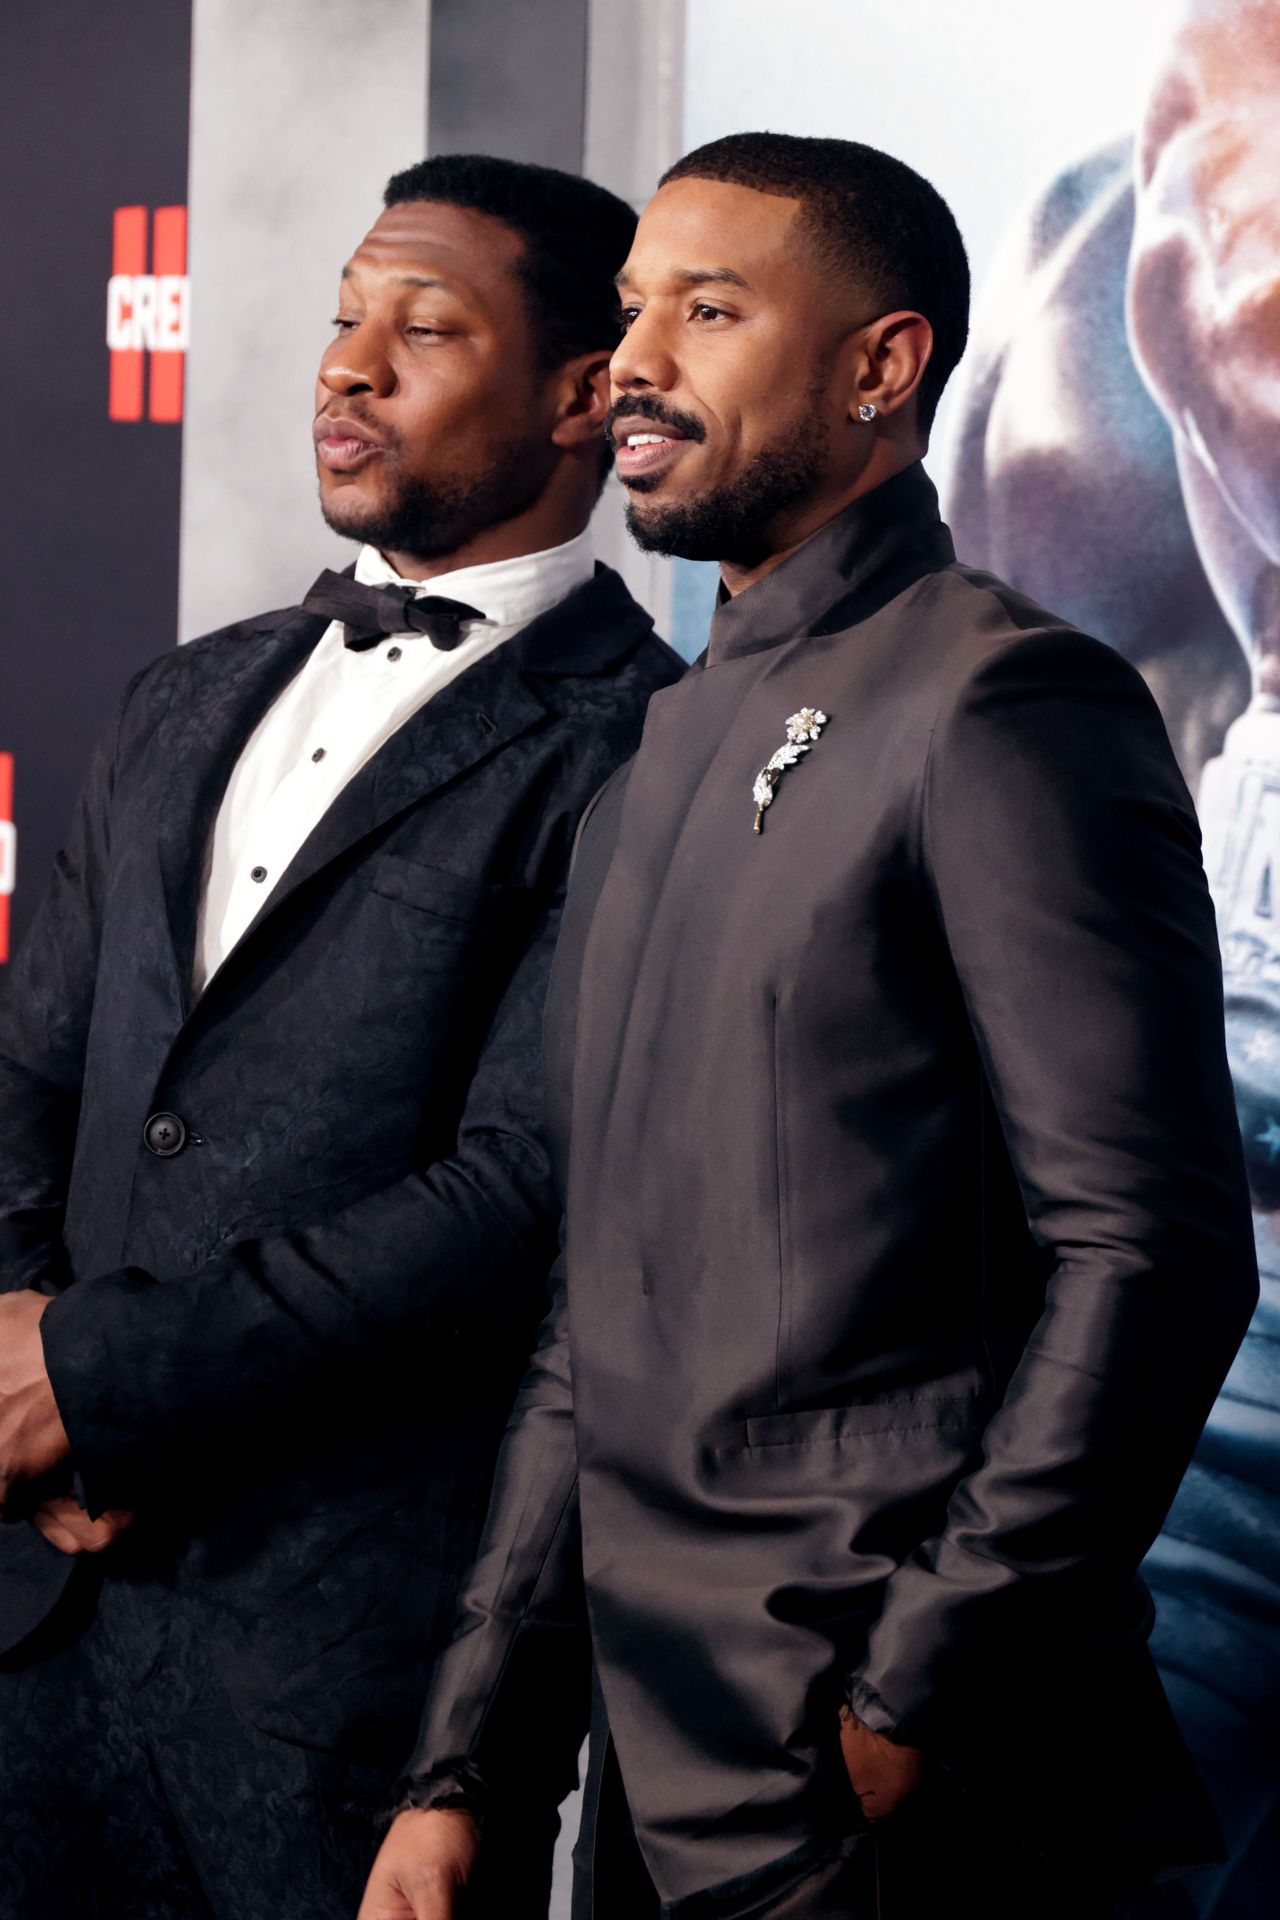 In Givenchy, Michael B. Jordan is a red carpet knockout - GQ Australia